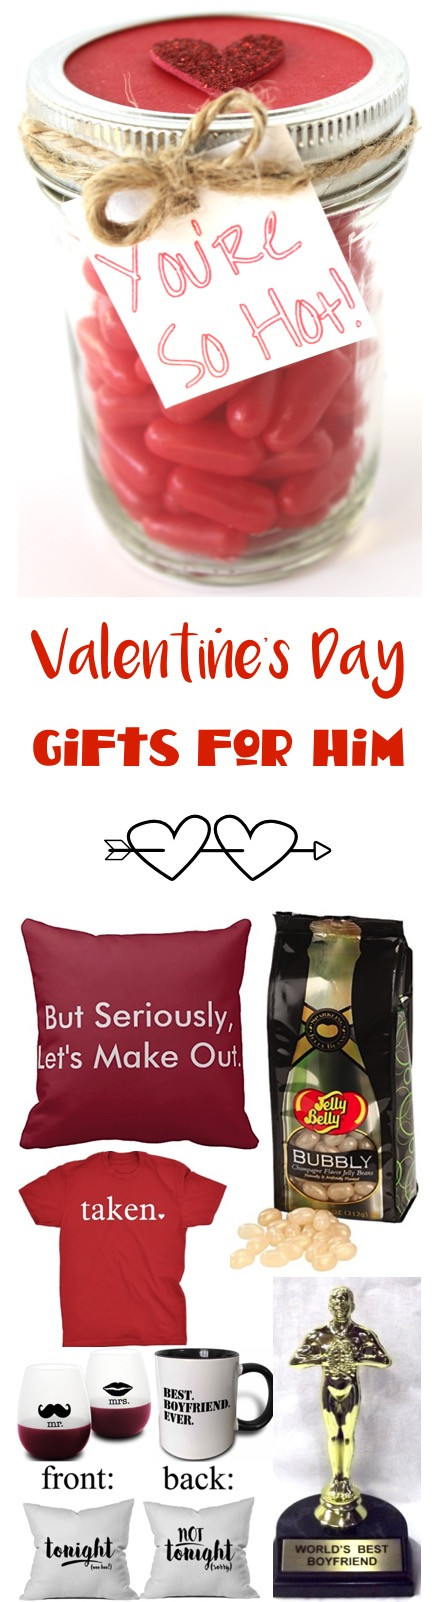 Valentine Gift Ideas For Men
 49 Valentine s Day Gifts for Him Fun & Romantic The